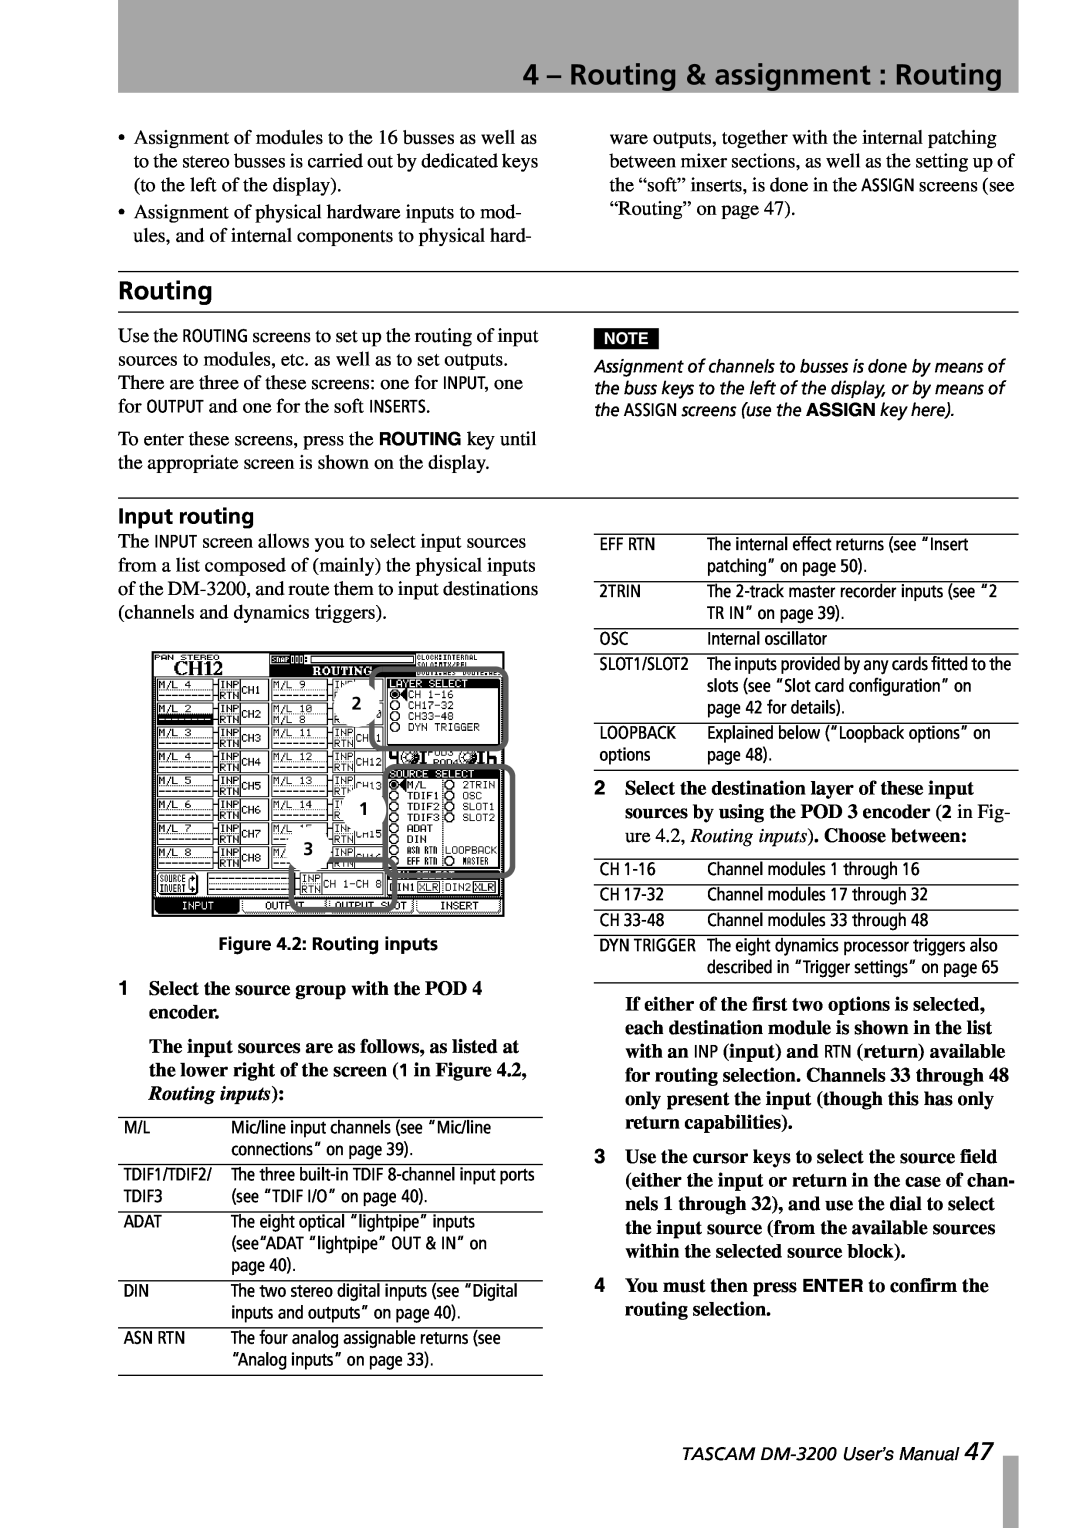 Tascam DM-3200 owner manual 4 – Routing & assignment : Routing, Input routing 